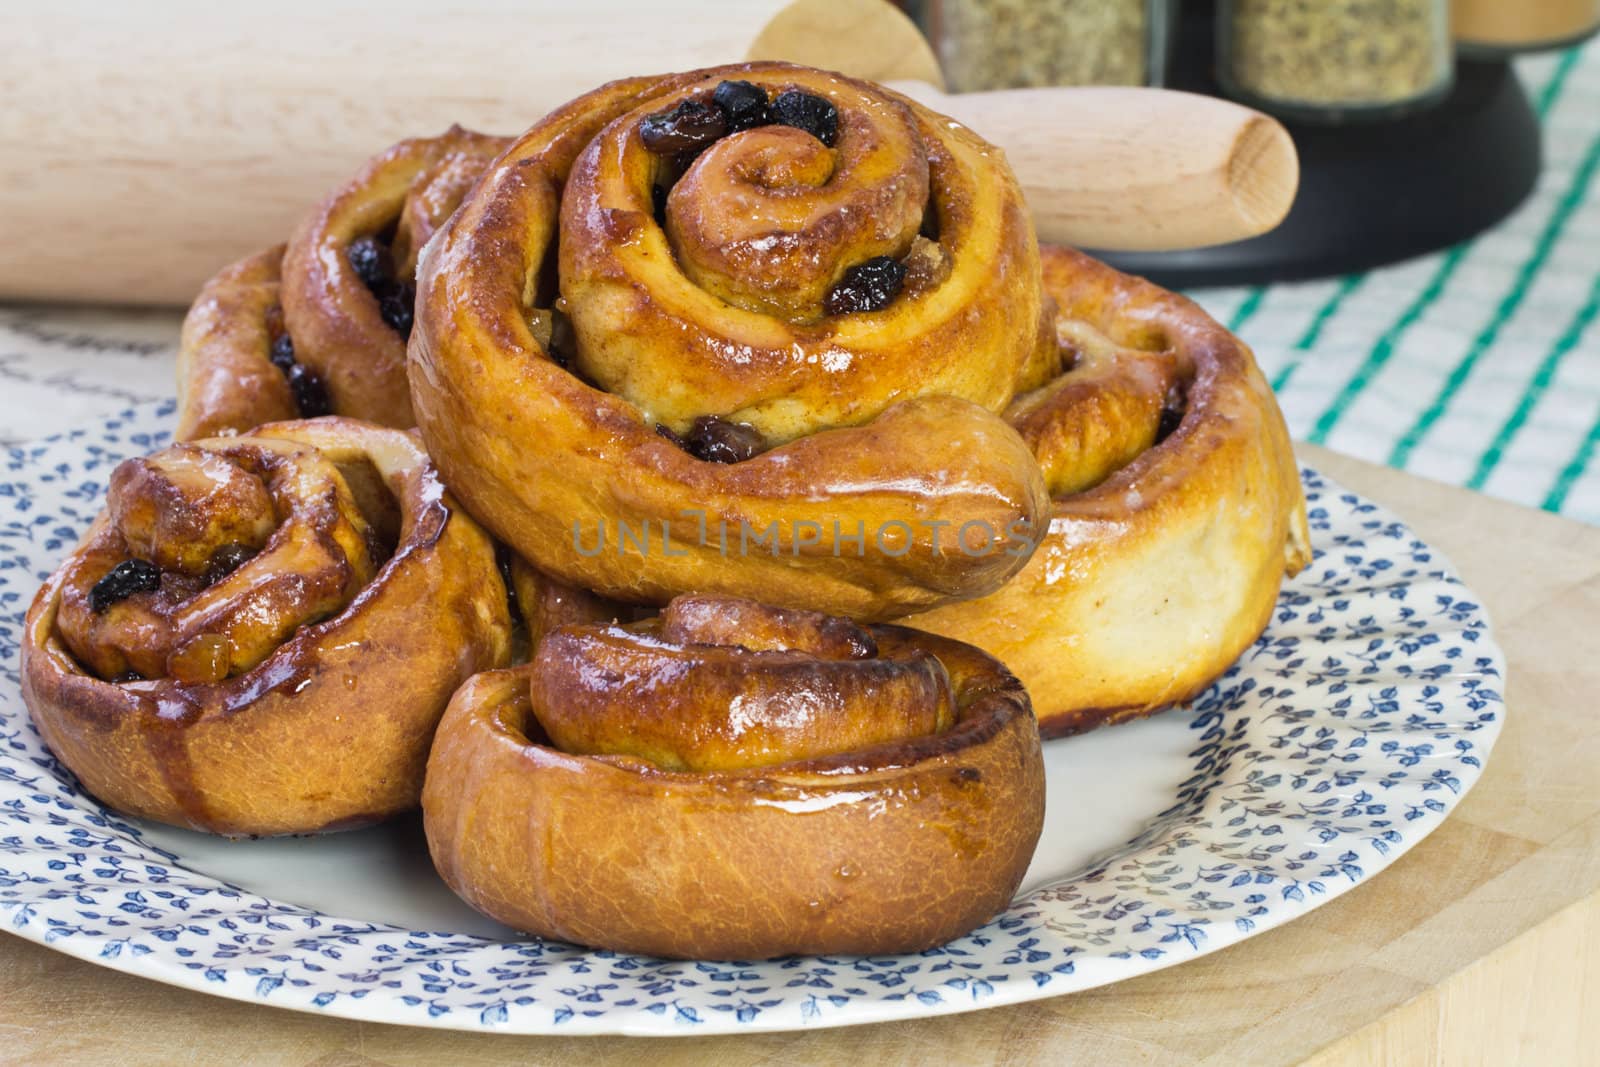 A plate of freshly baked Chelsea Buns